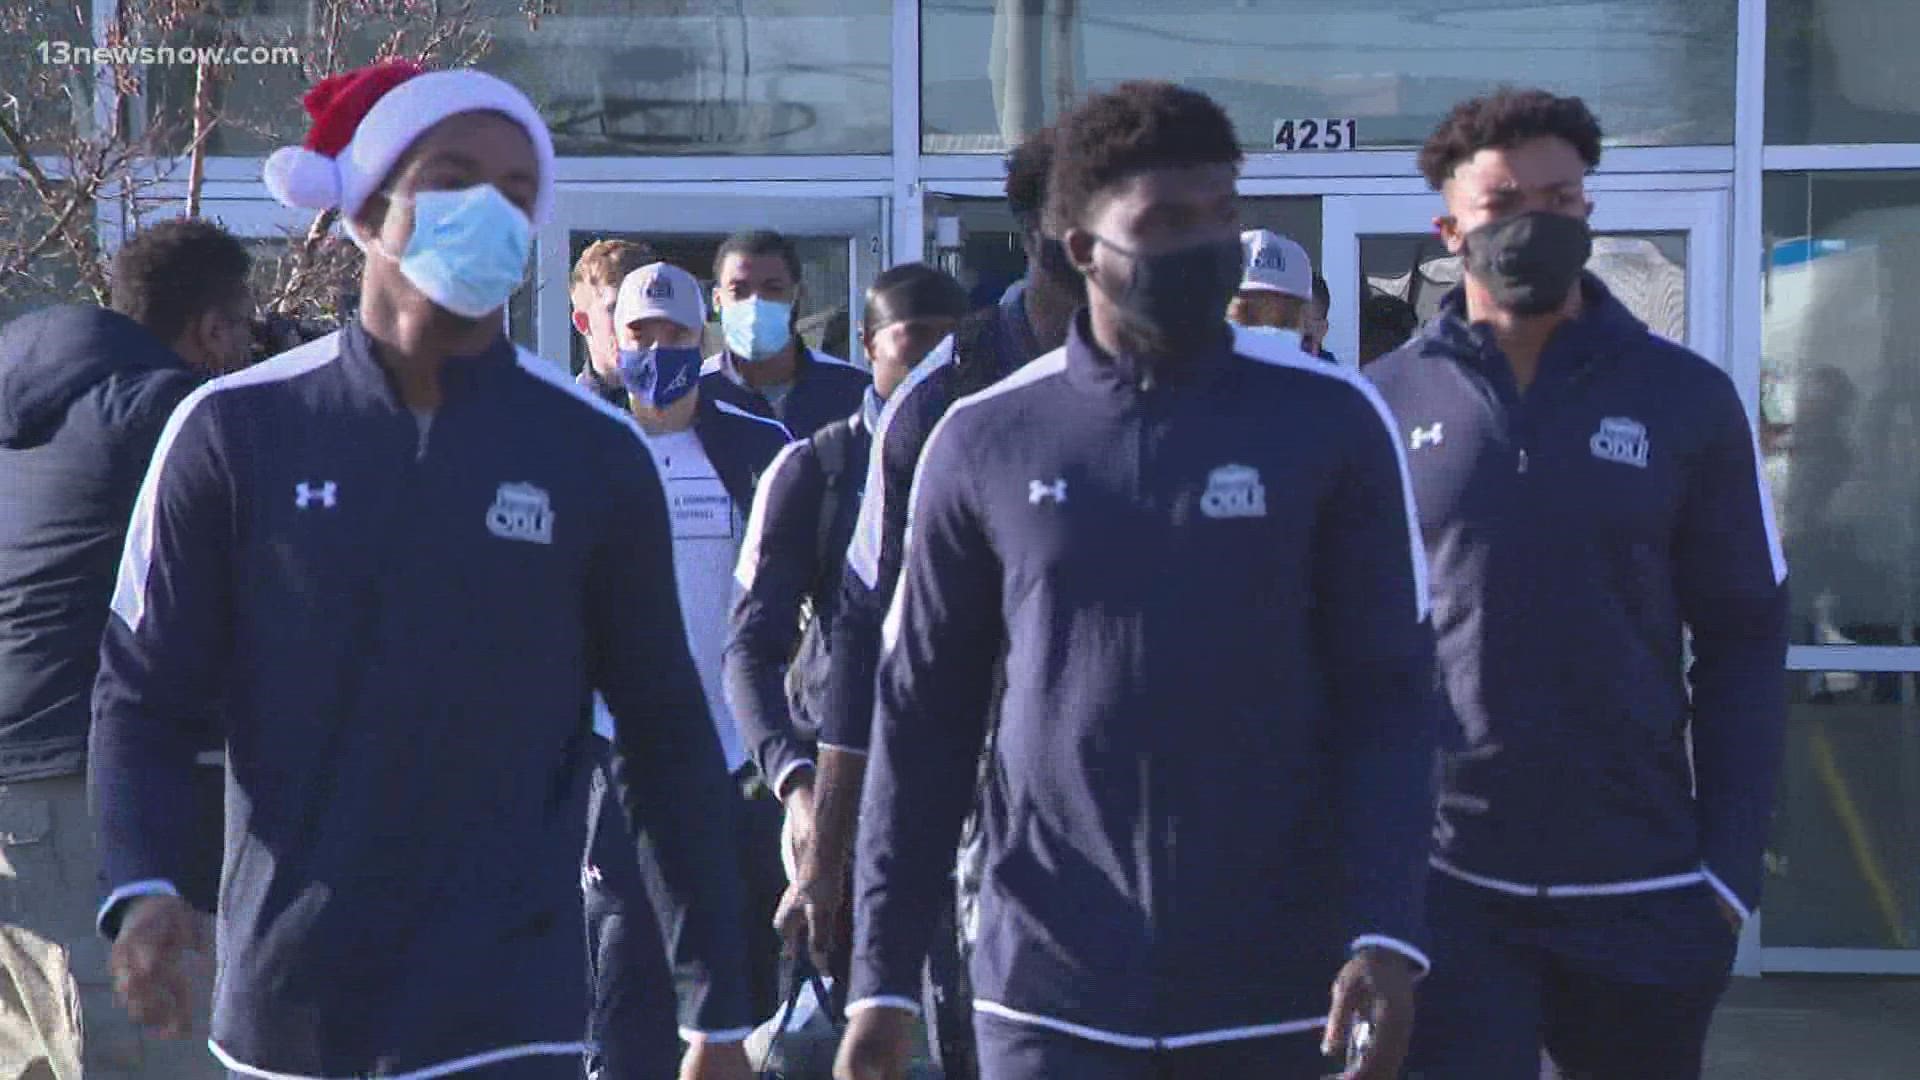 ODU football hit the road to Myrtle Beach for their bowl game